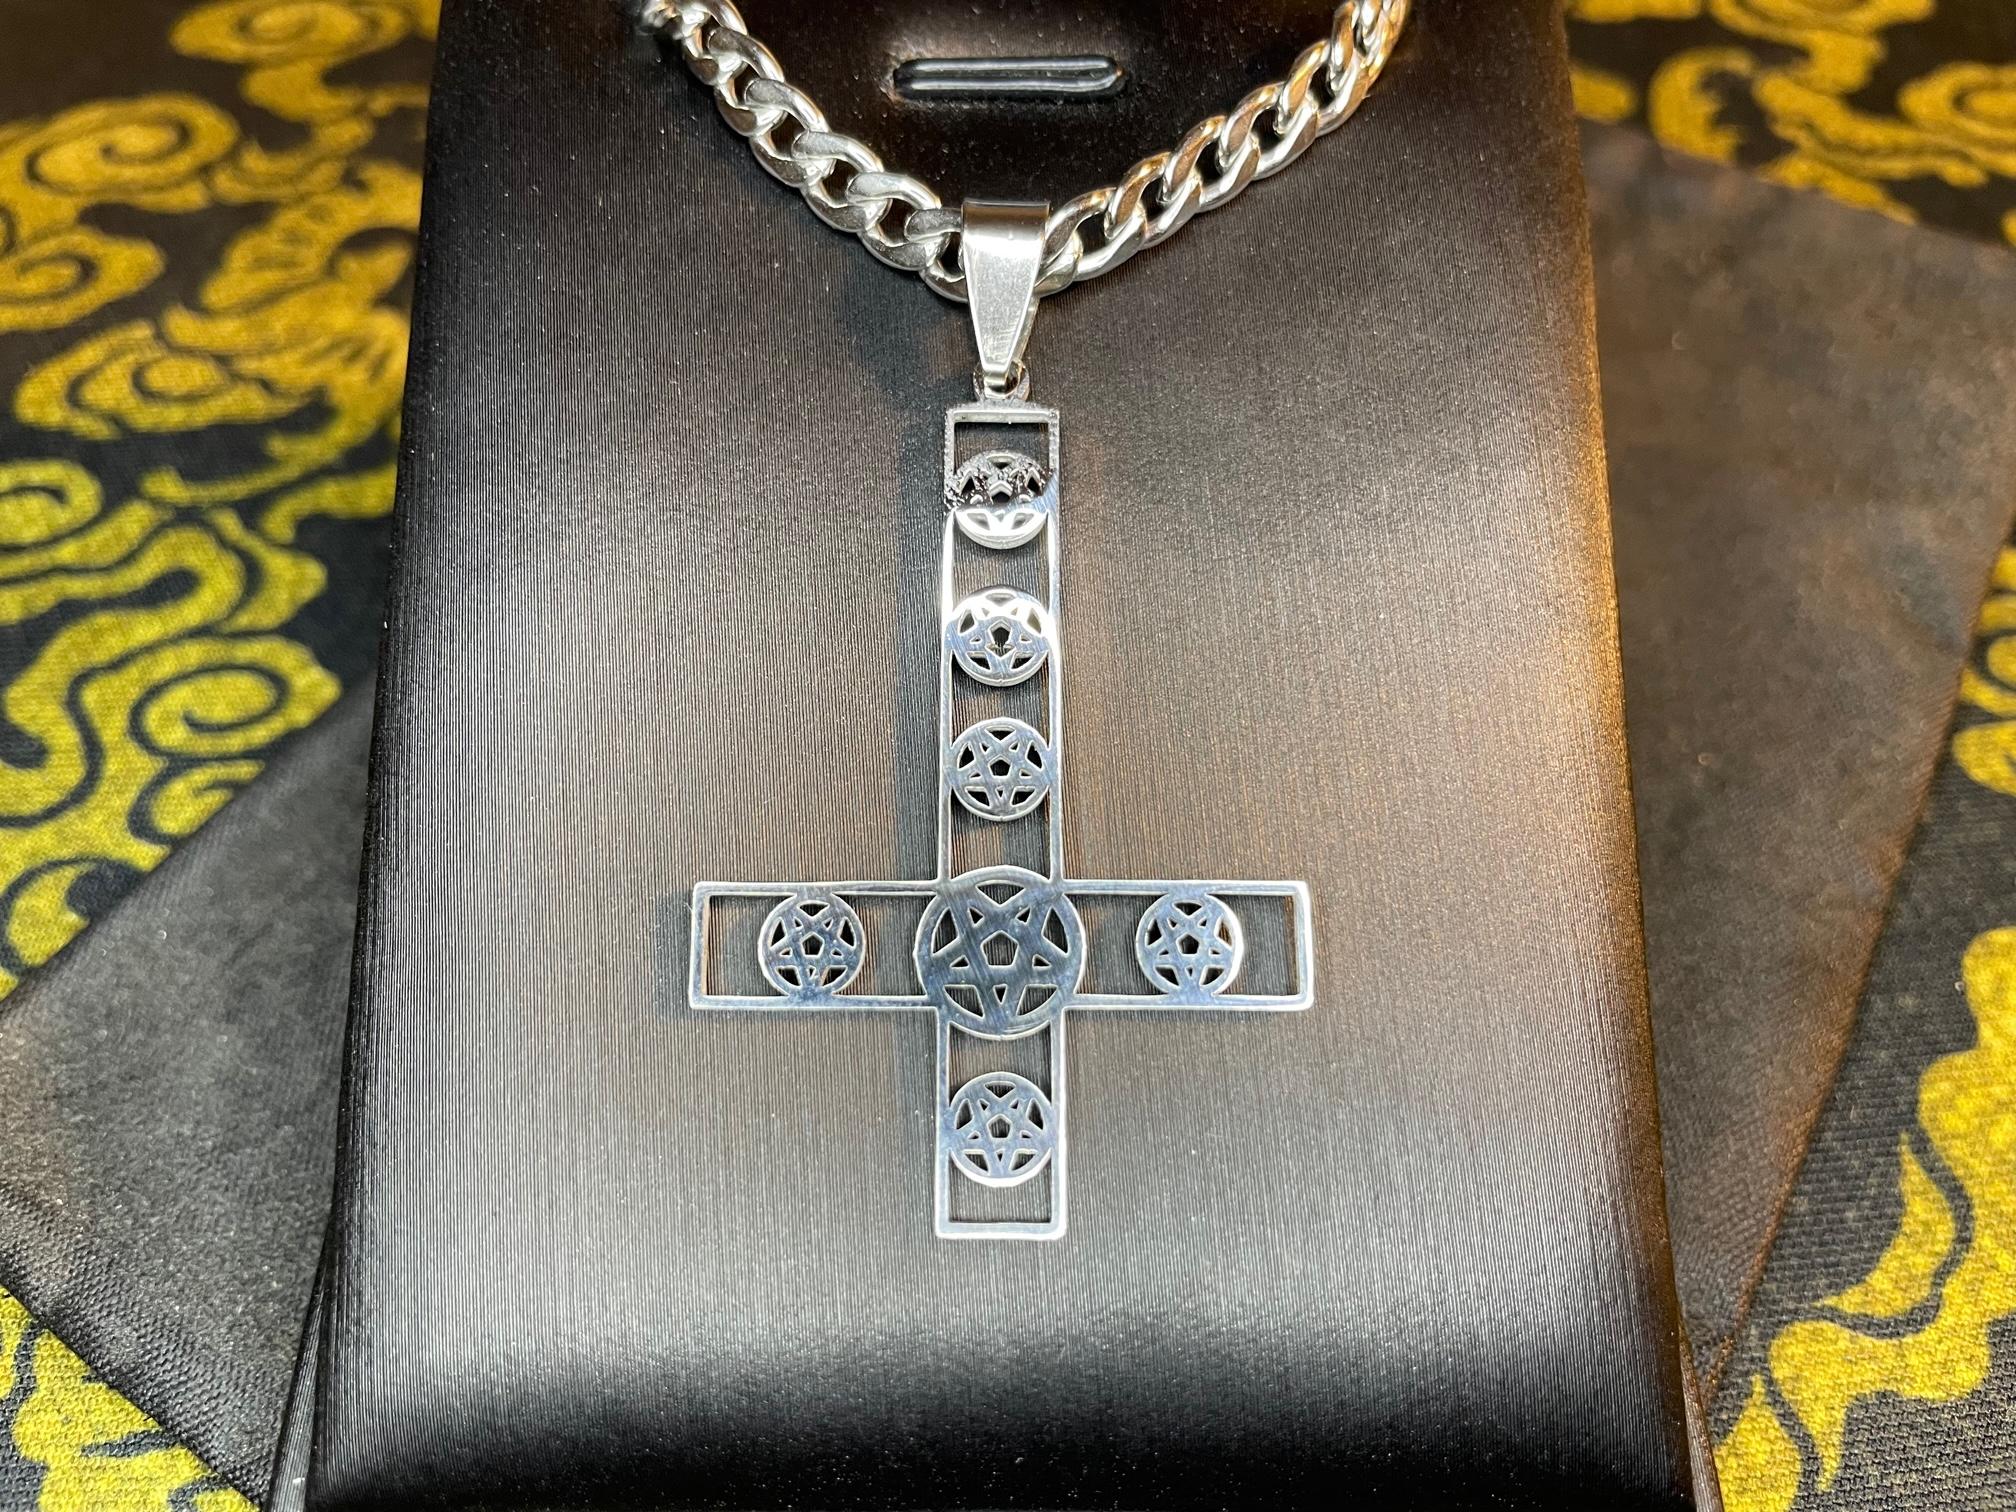 upside down inverted cross pentagram stainless steel gothic pendant necklace gift for men women satanic wiccan occult darkness jewelry silver